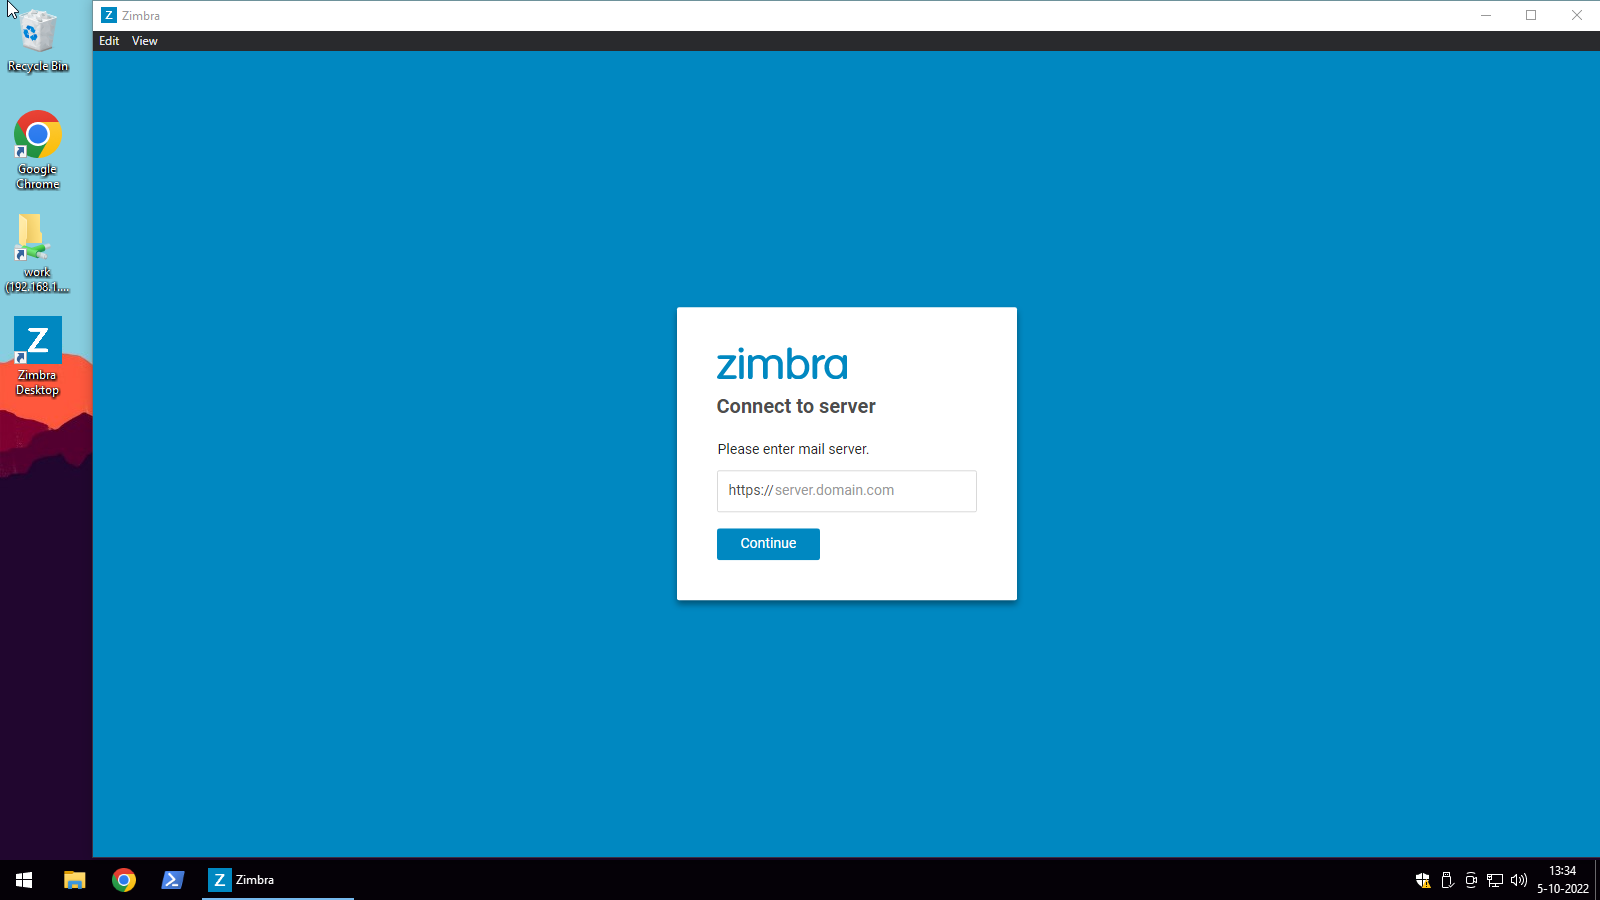 VMware Zimbra 8.0: Messaging & Collaboration for the Post-PC Era